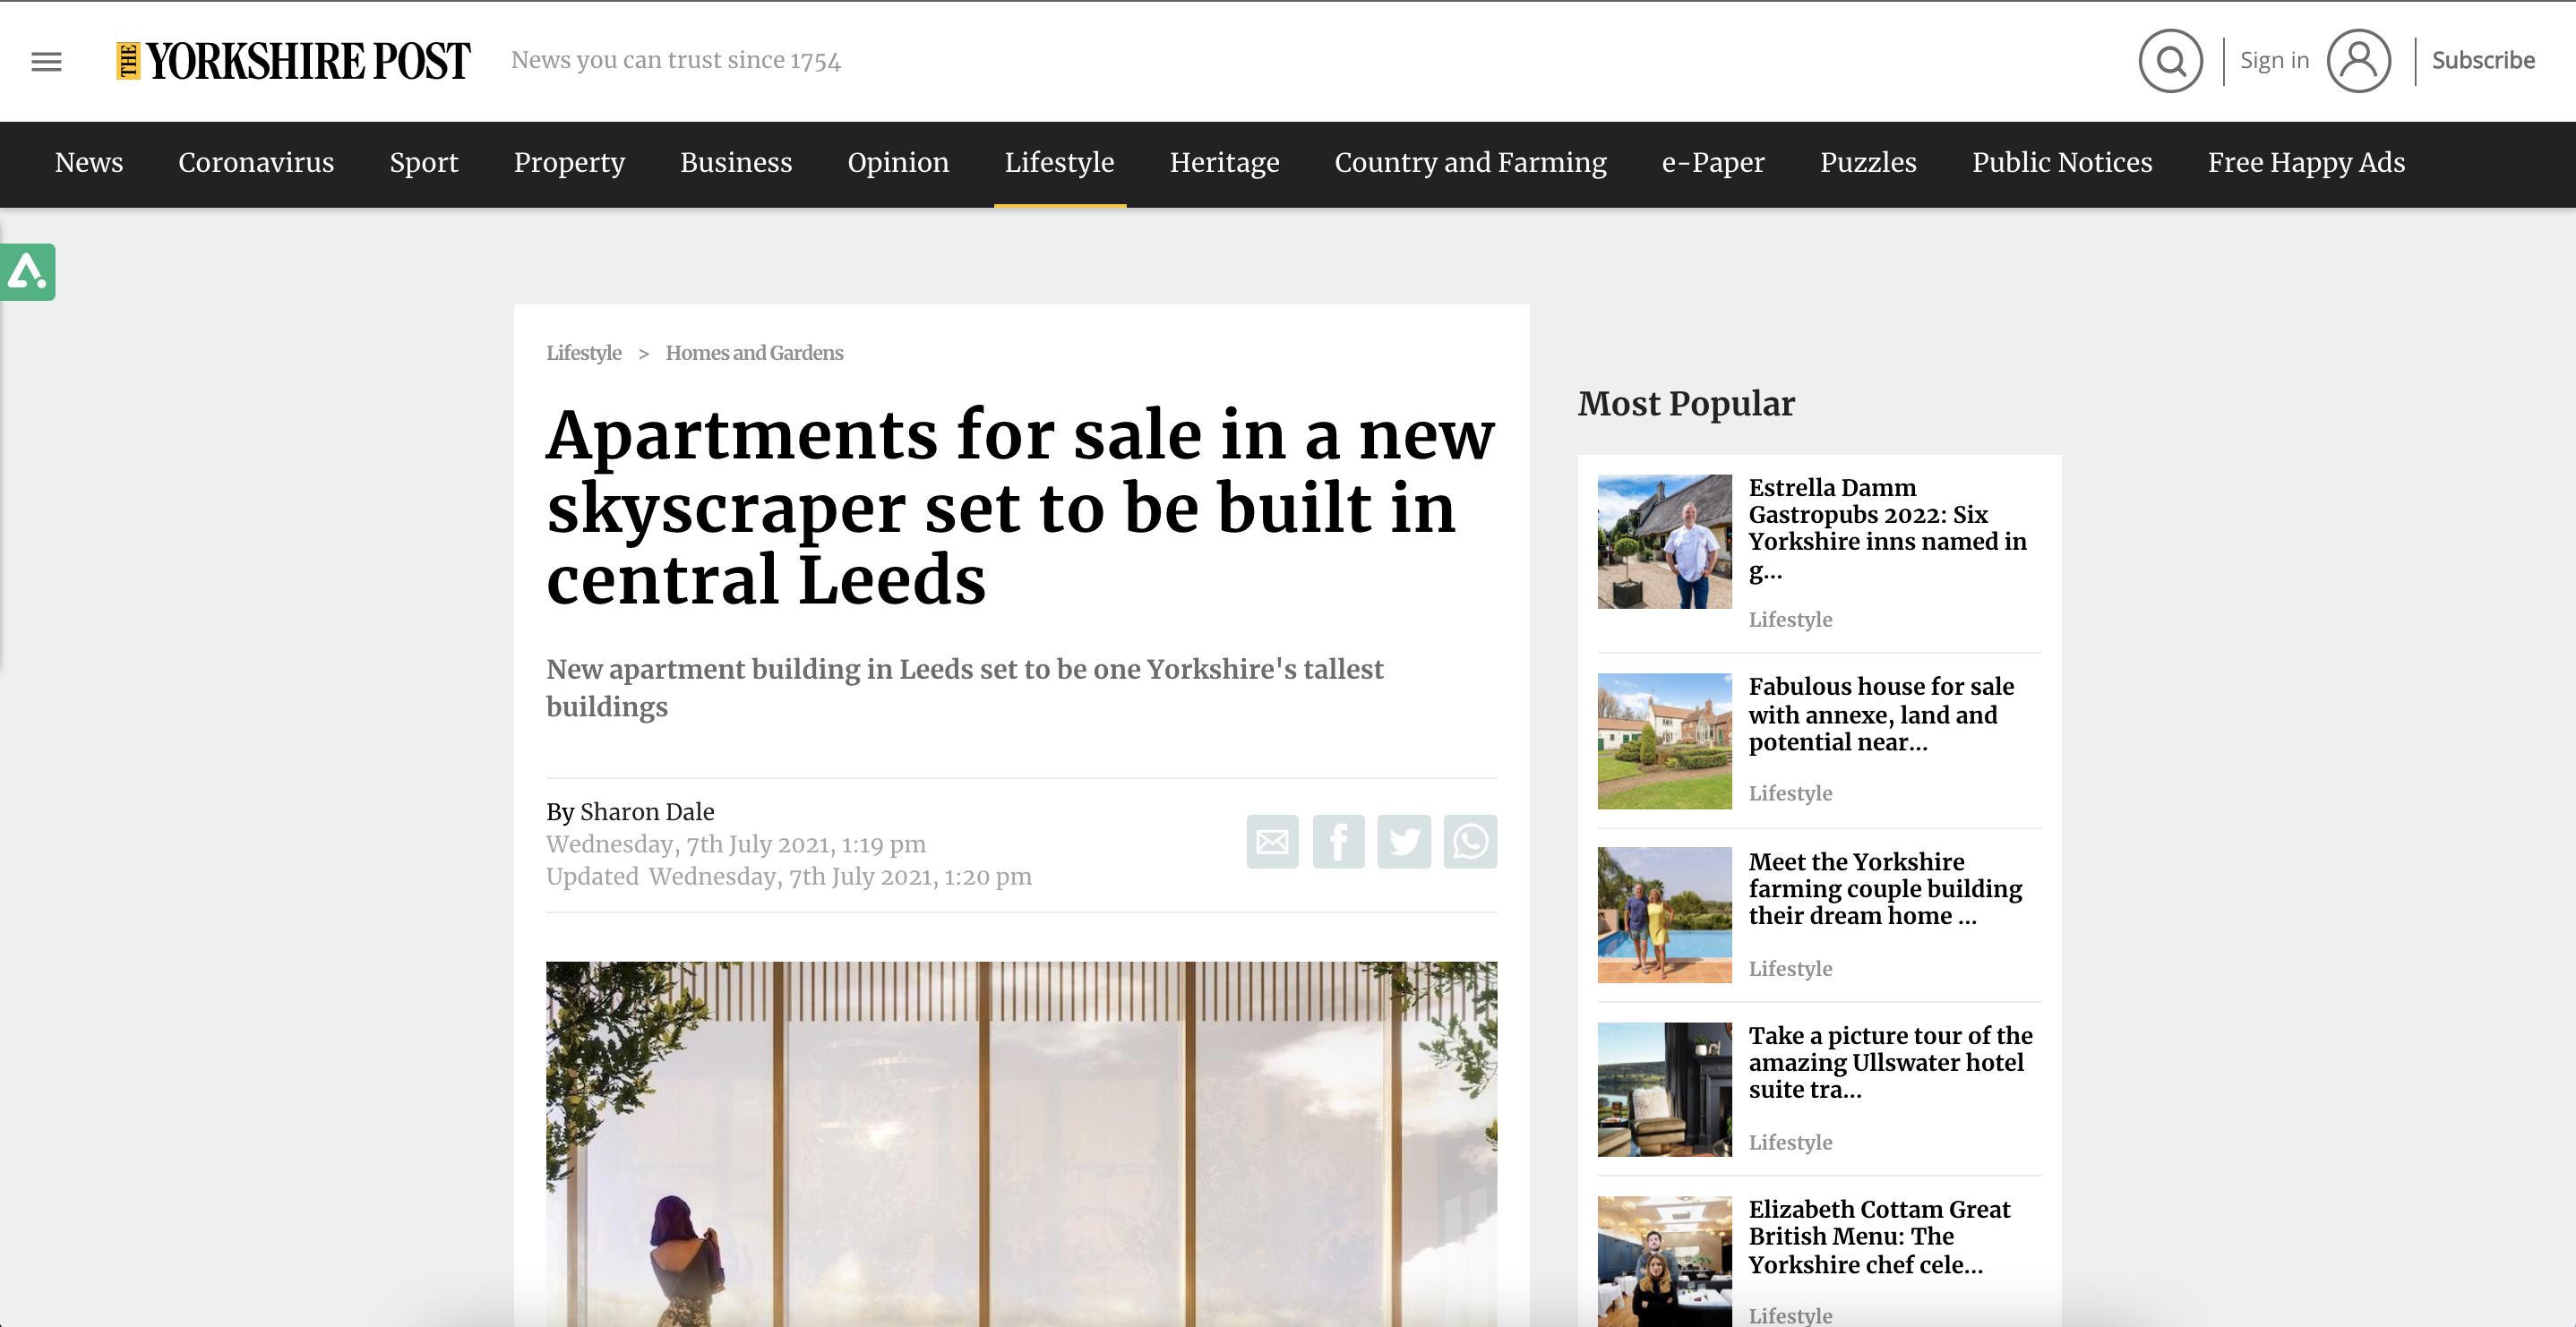 Apartments for sale in a new skyscraper set to be built in central Leeds